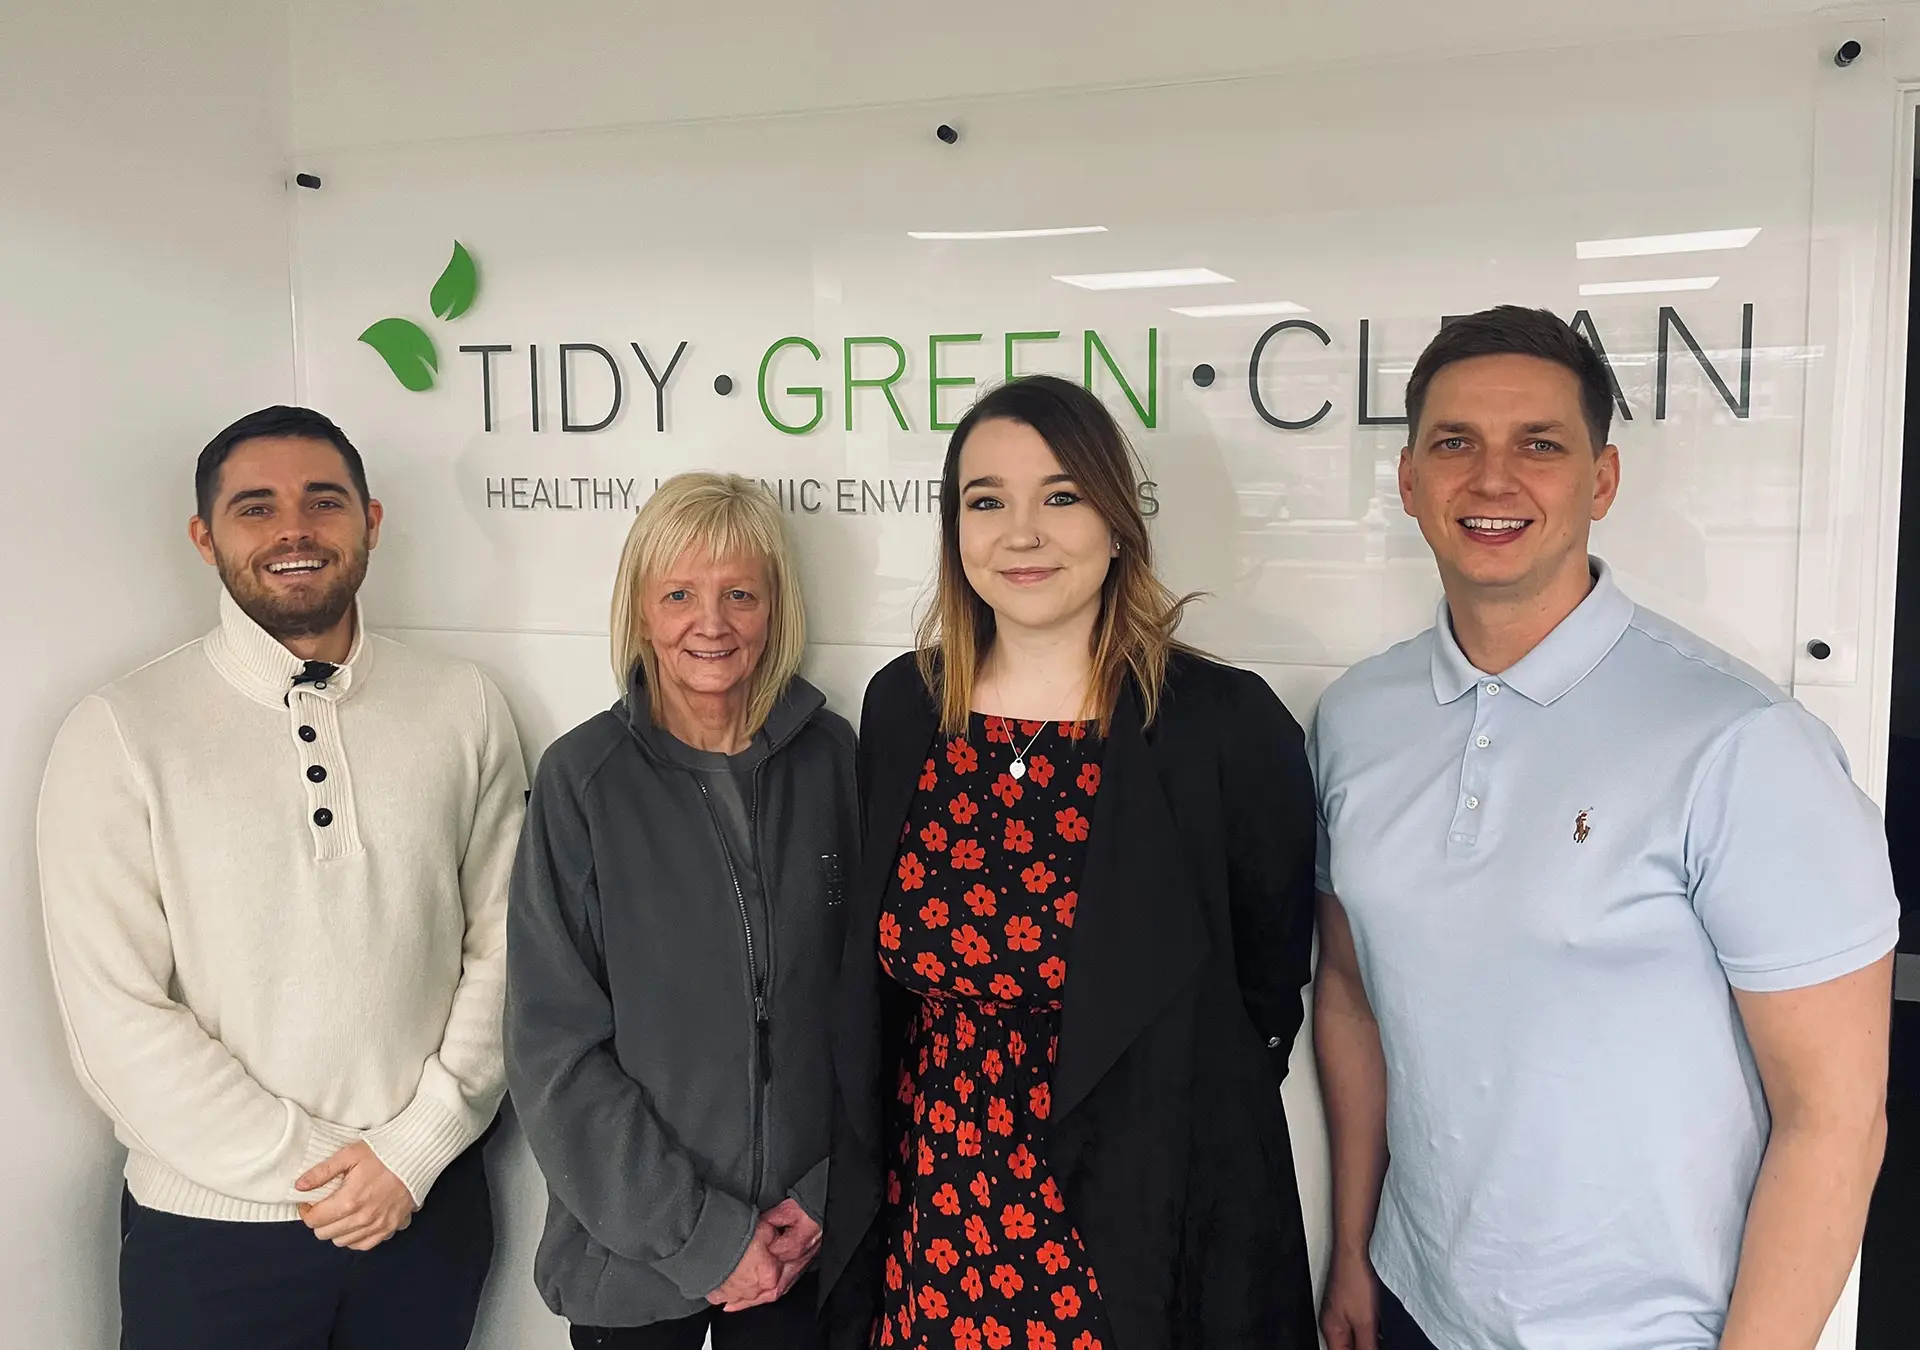 tidy green clean franchise aberdeen north